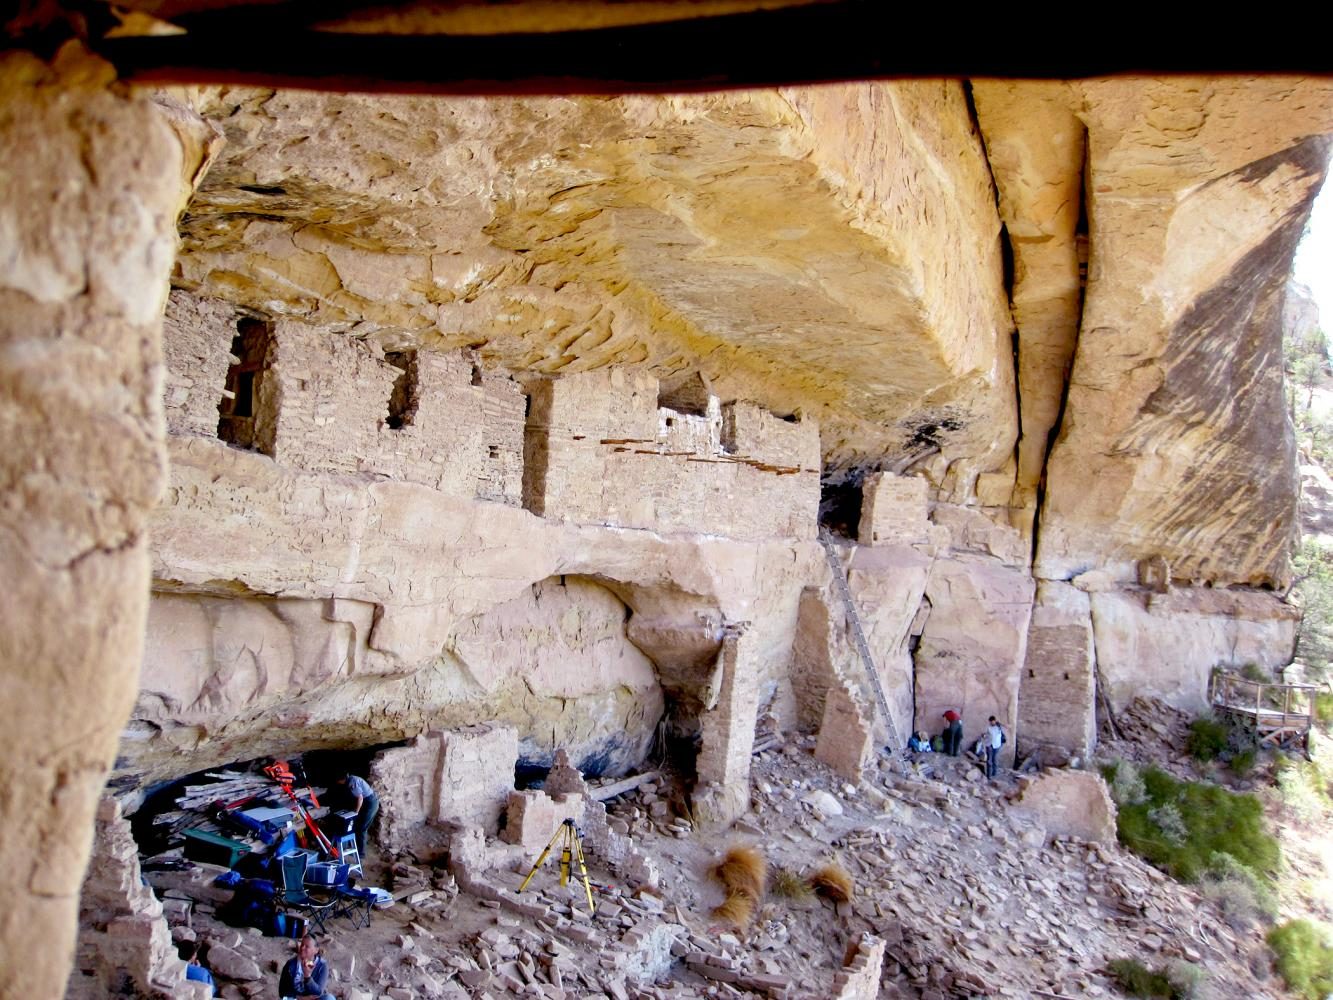 Park service personnel stabilize a Pueblo home from the 1200s in Mesa Verde National Park.